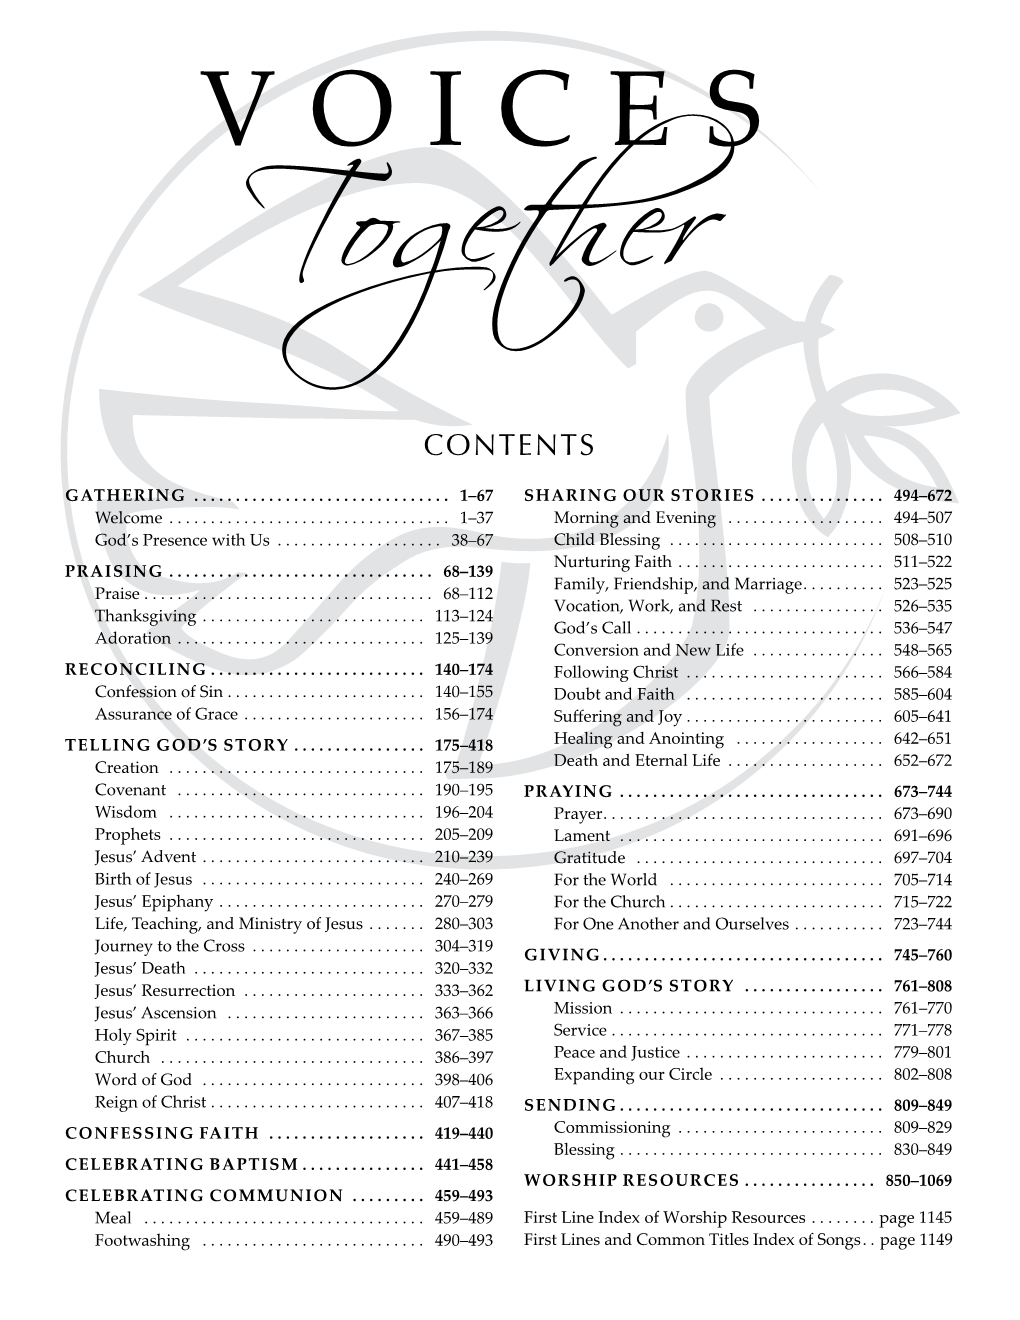 Full Table of Contents